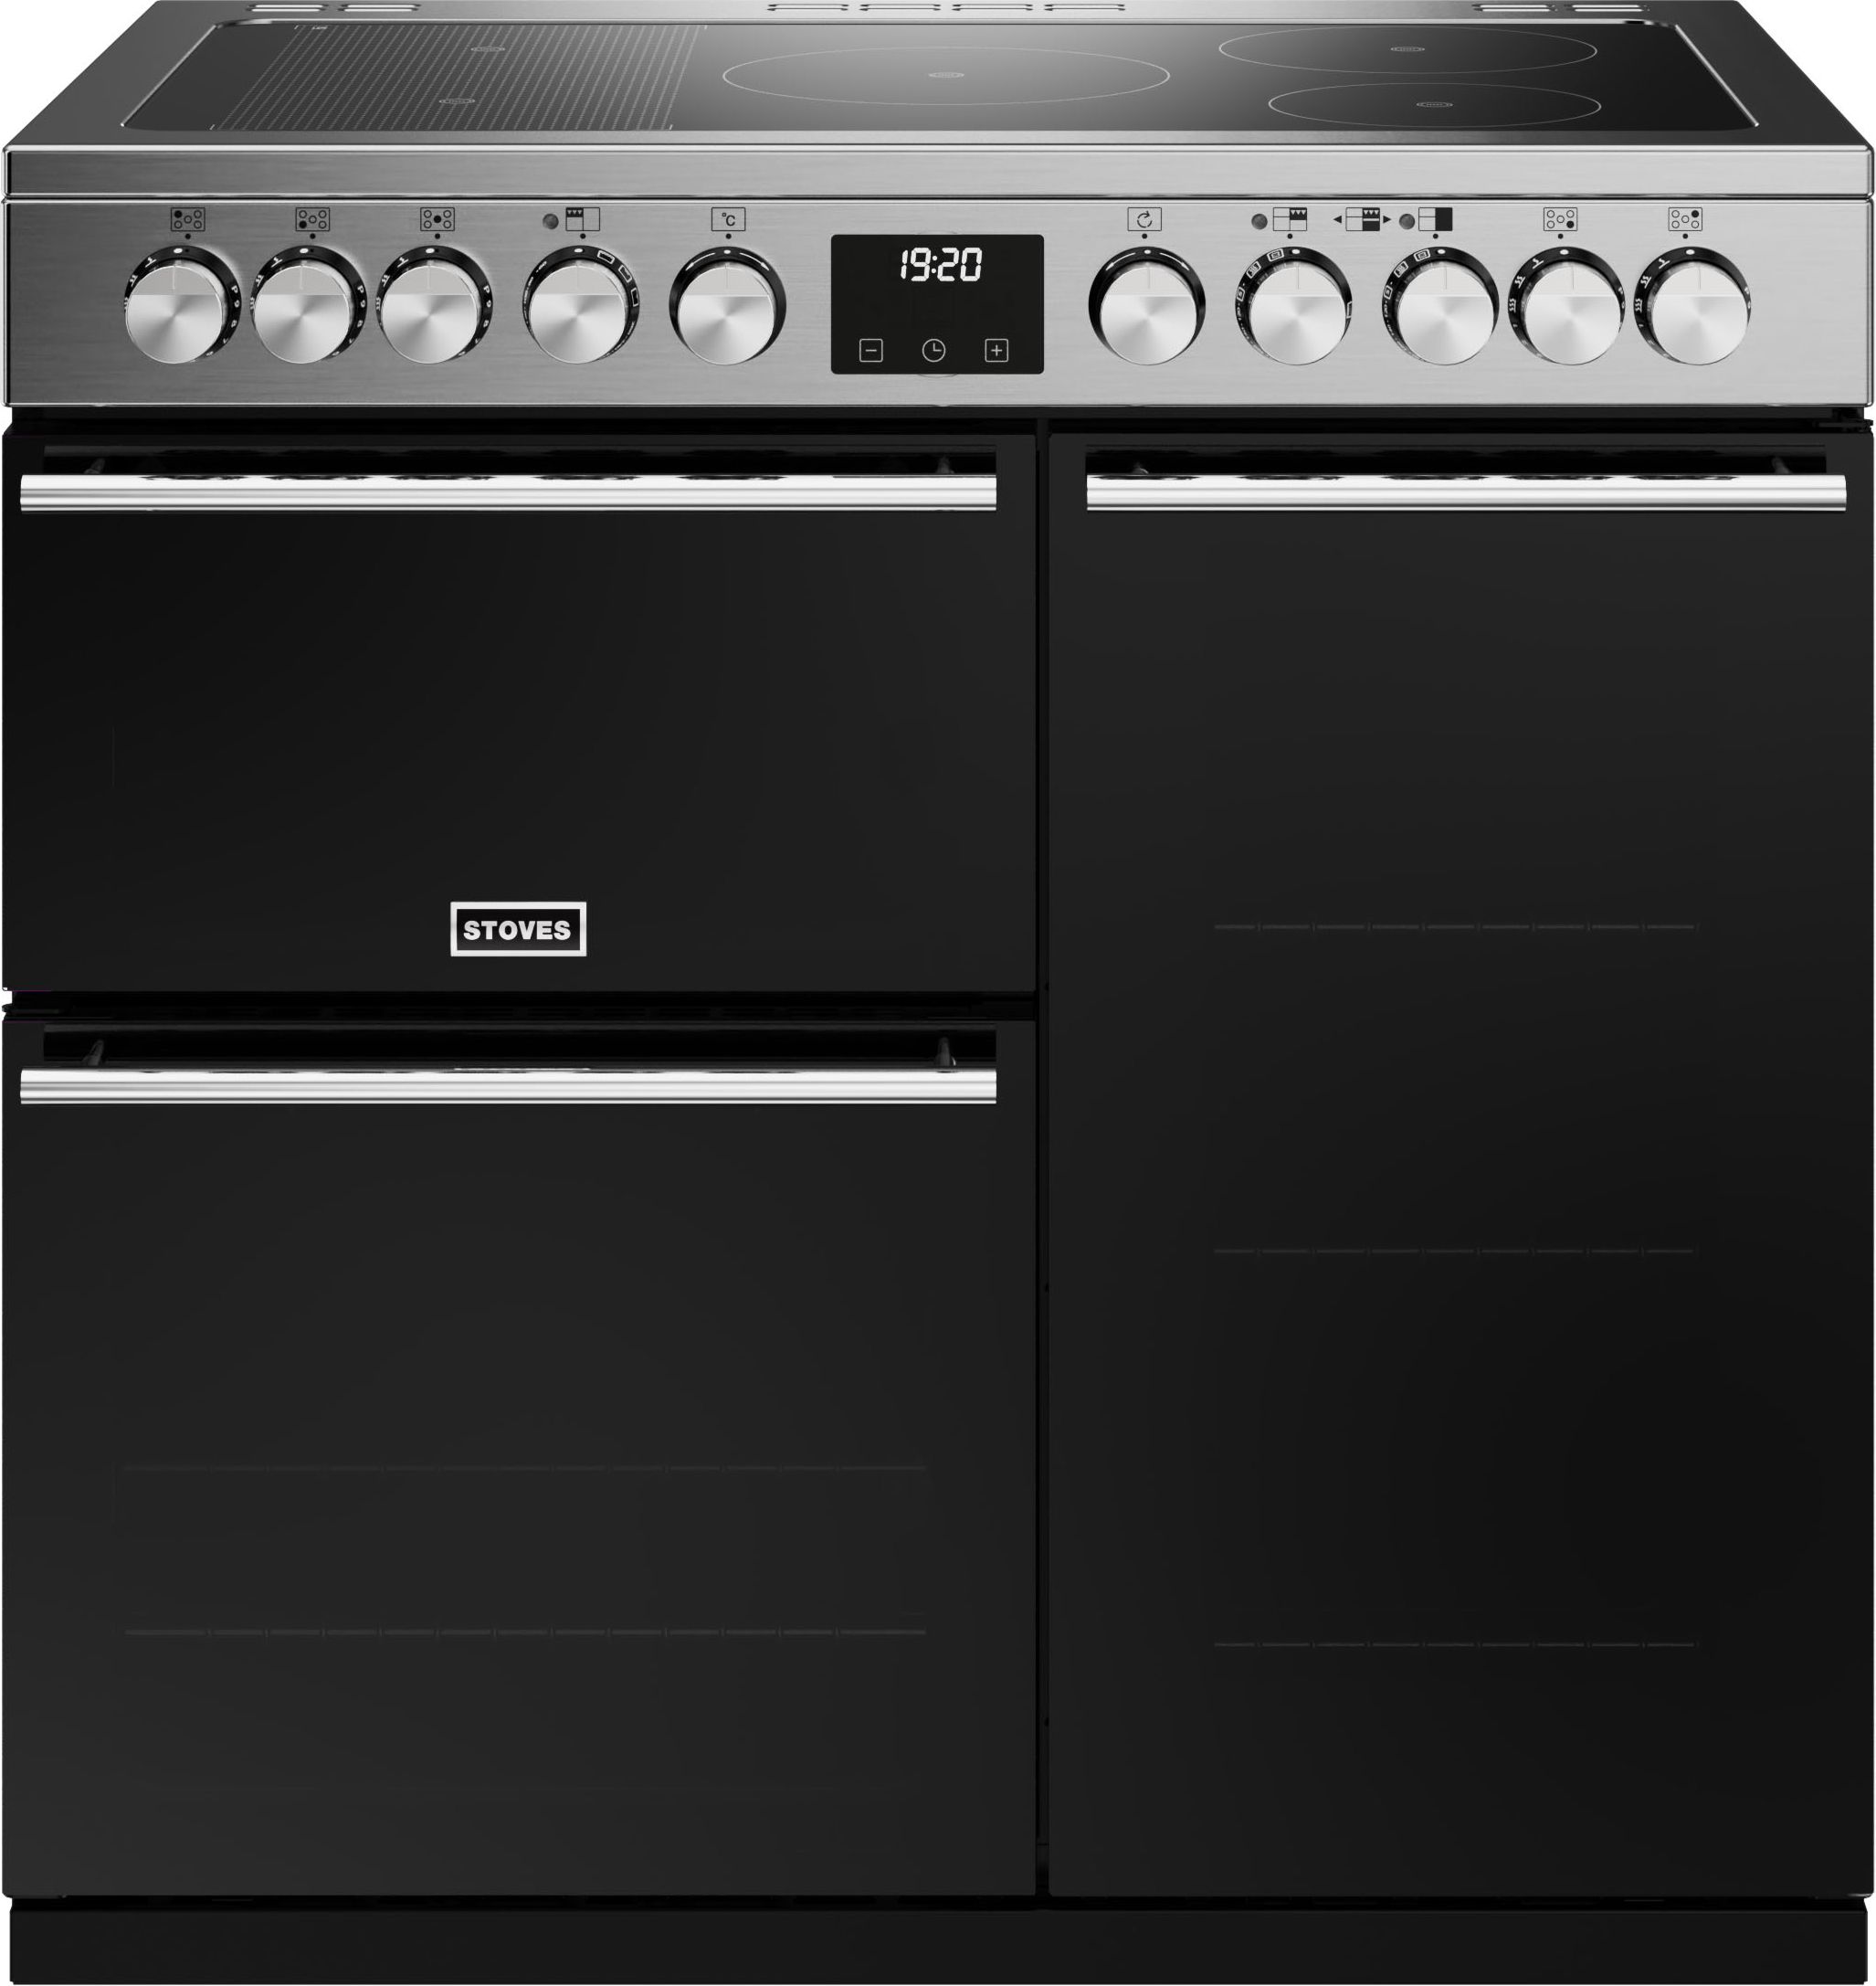 Stoves Precision Deluxe ST DX PREC D900Ei RTY SS 90cm Electric Range Cooker with Induction Hob - Black / Stainless Steel - A Rated, Black